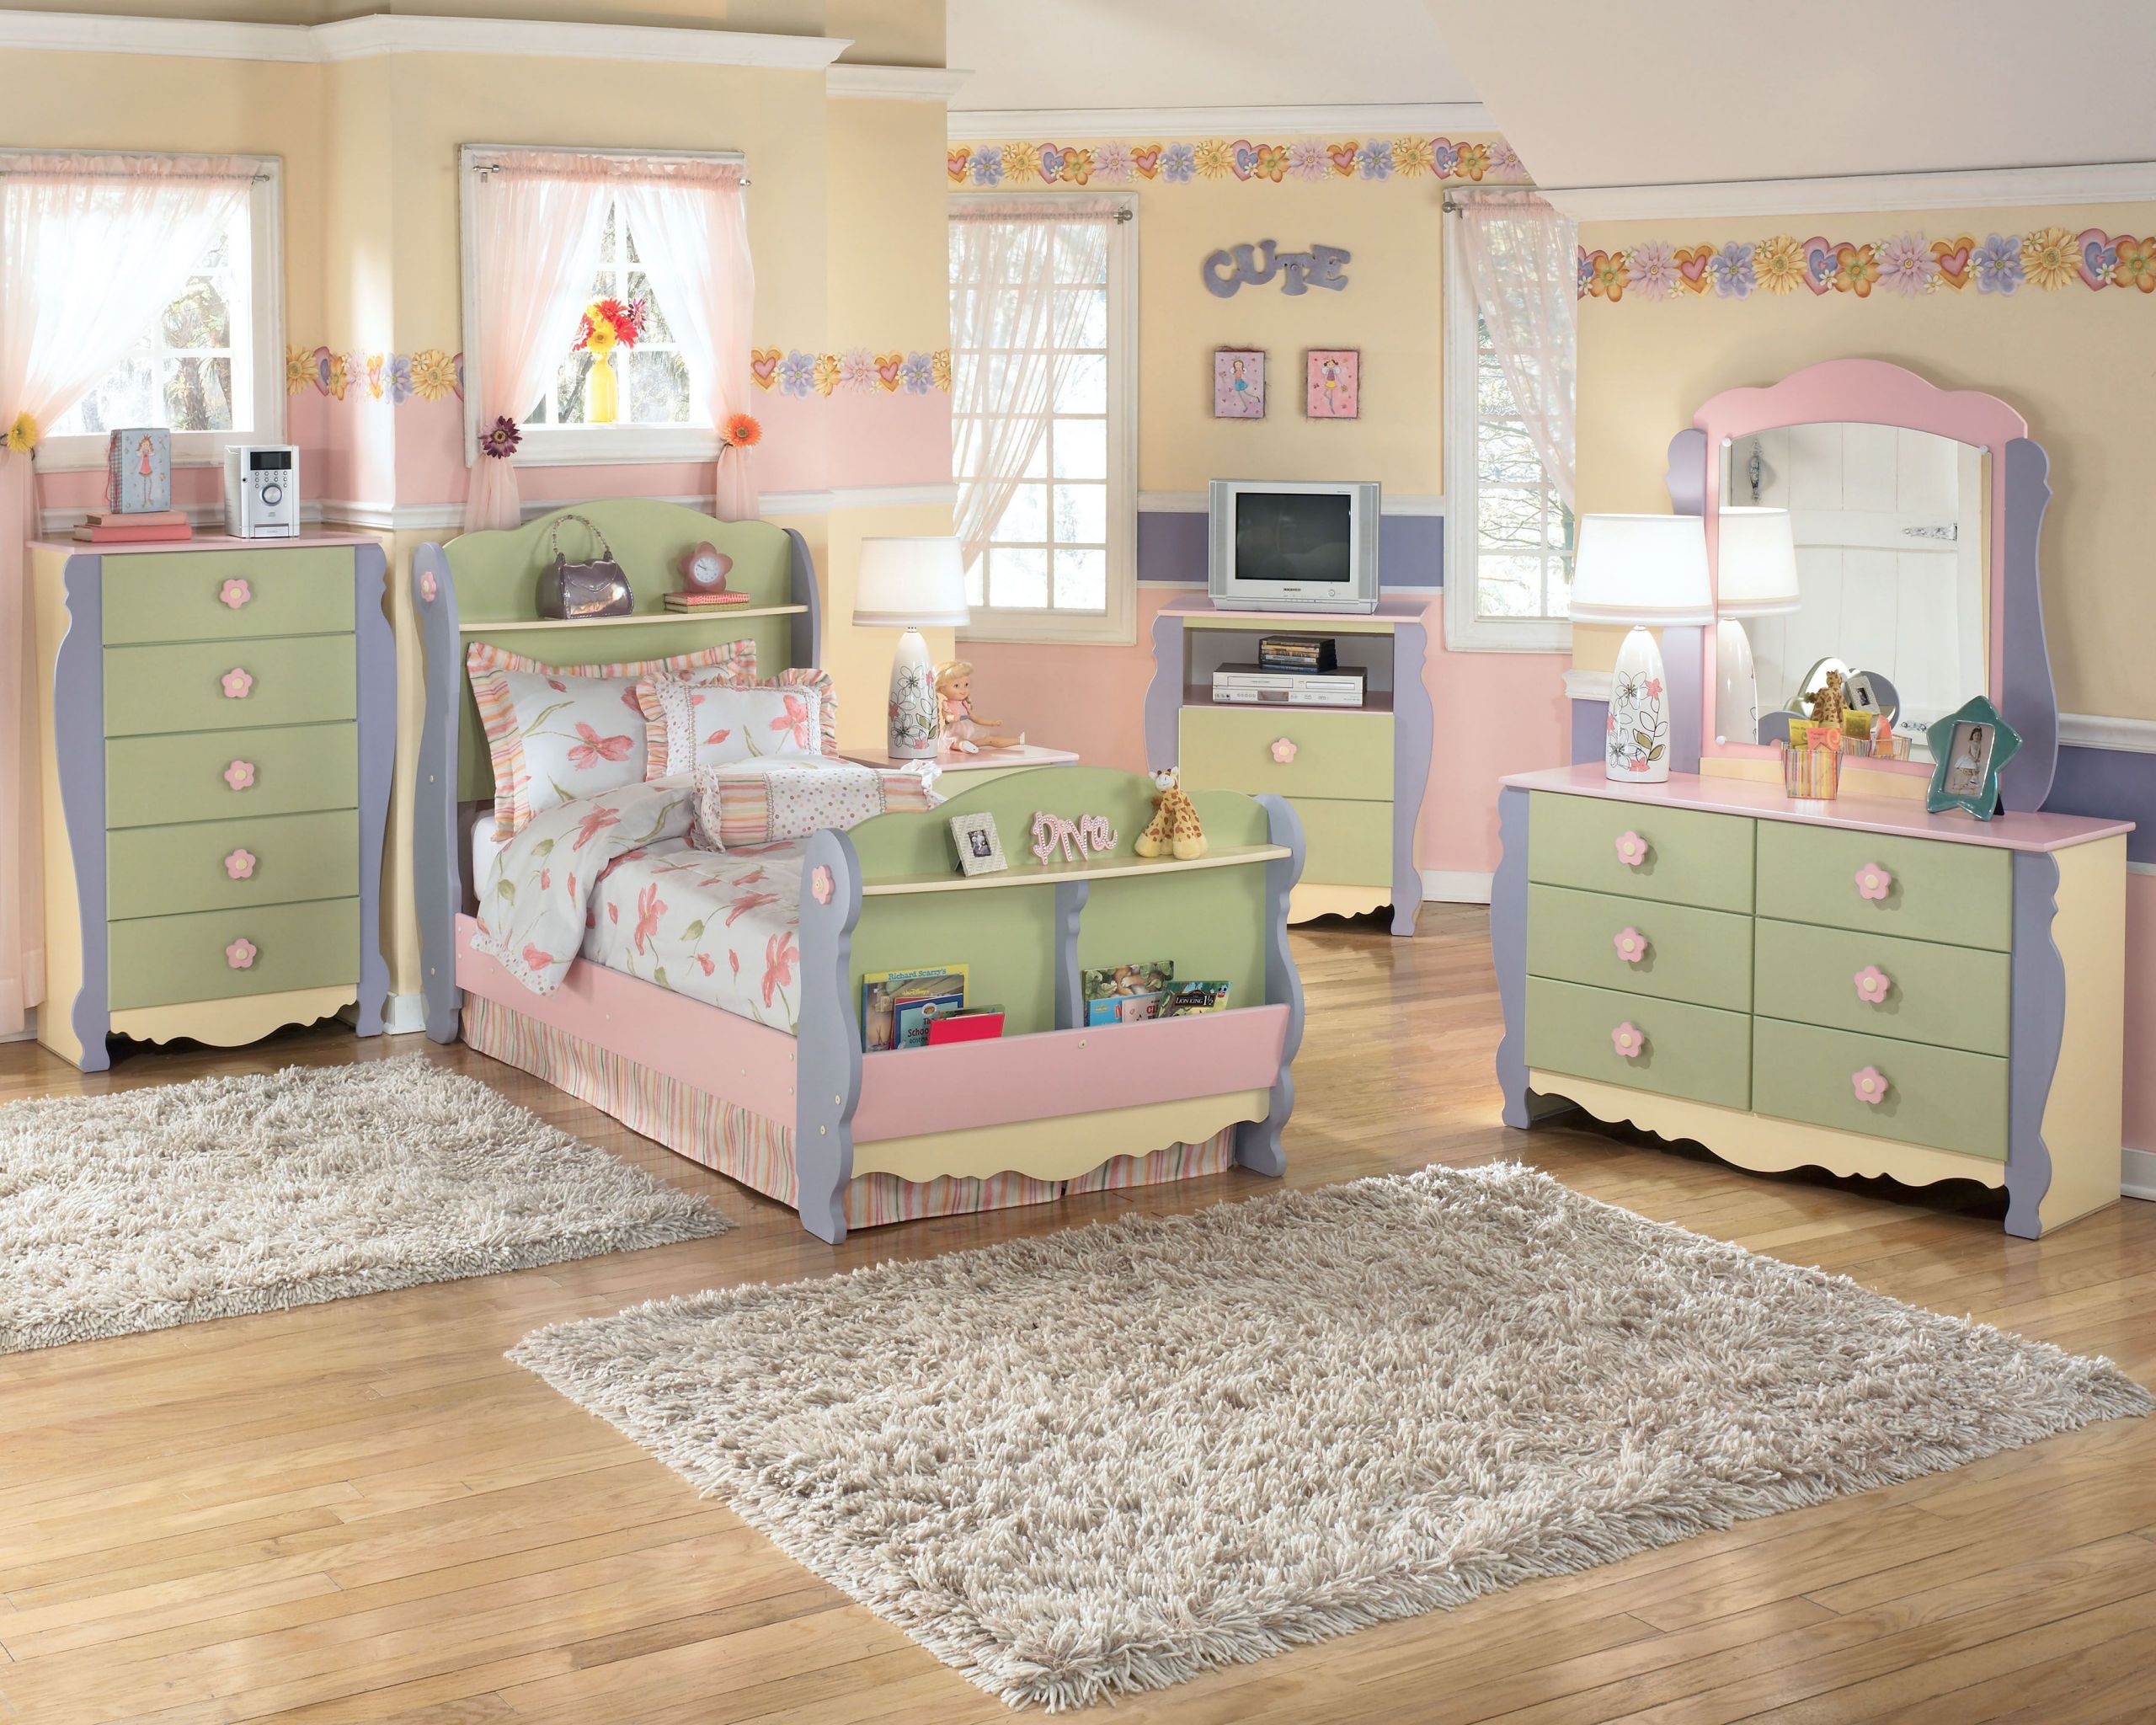 Ashley Furniture Kids Bedroom
 Such a sweet Ashley Furniture HomeStore bedroom for a